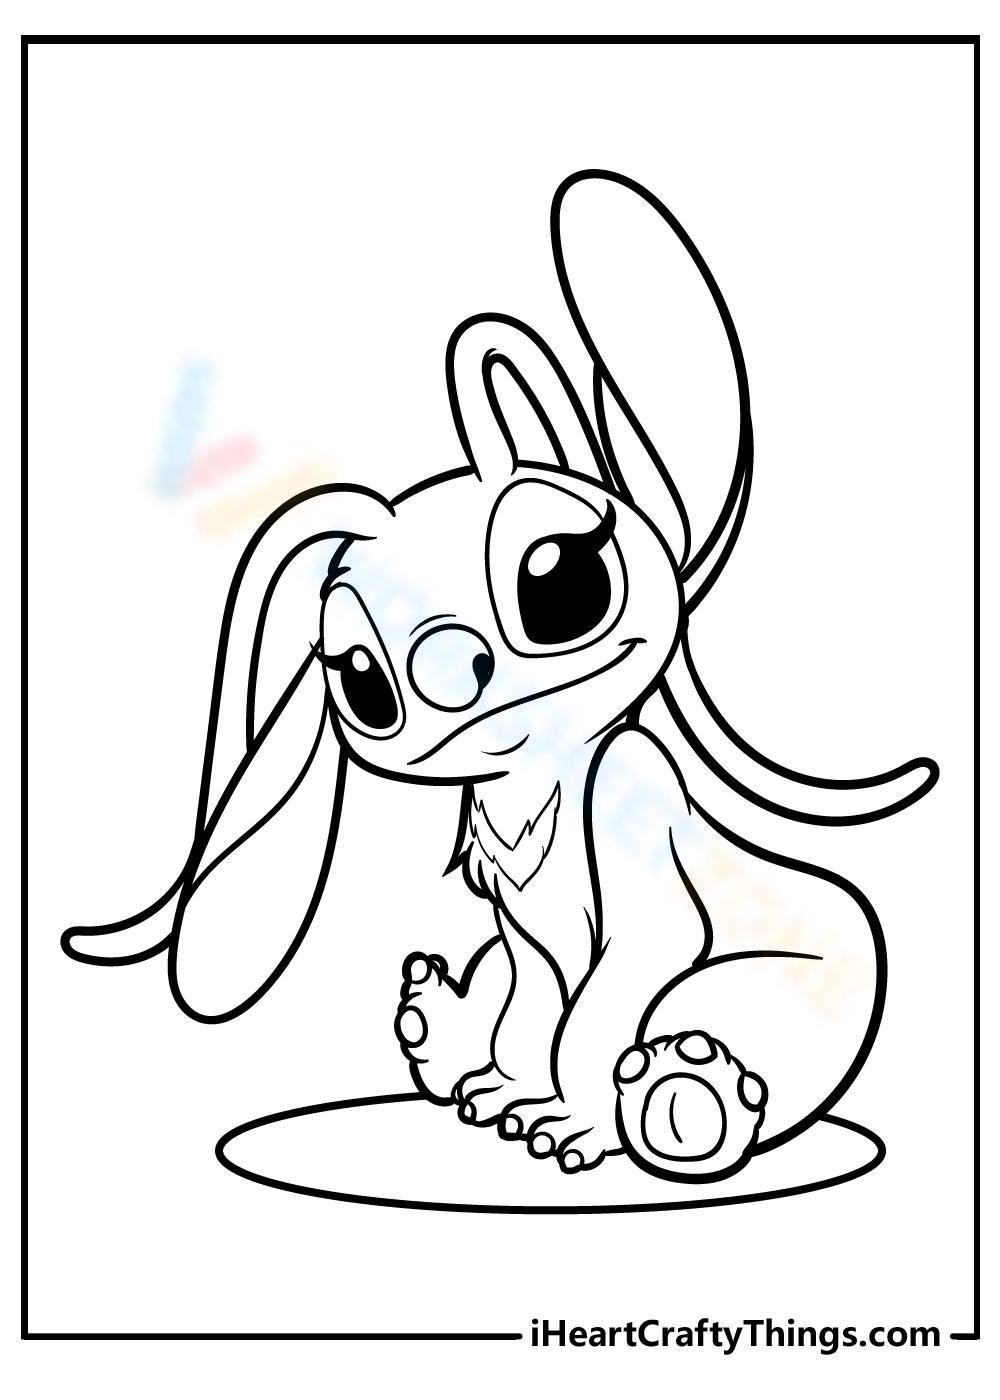 Printable Lilo & Stitch Coloring Pages ...